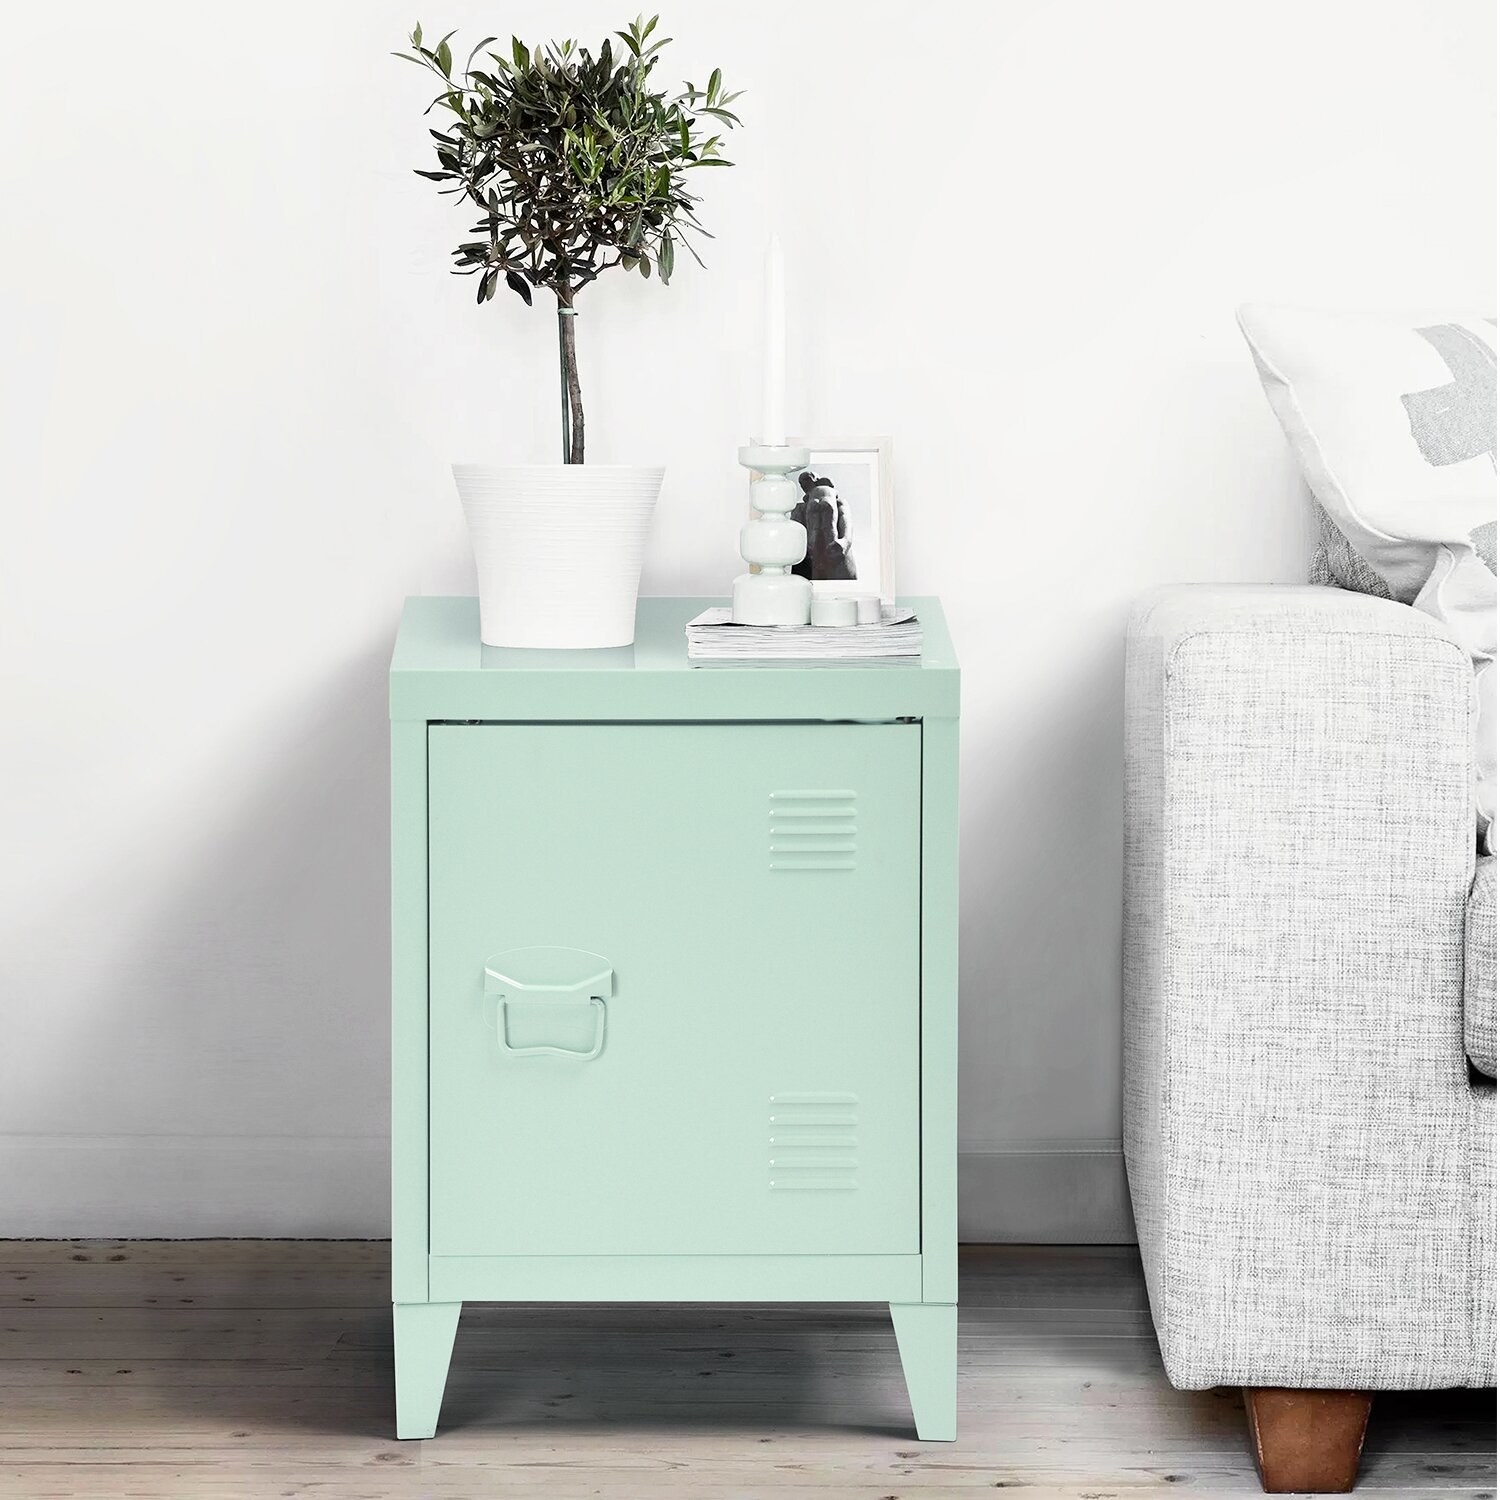 The end table, which has a hinged, forward-swinging door like a locker, in mint green